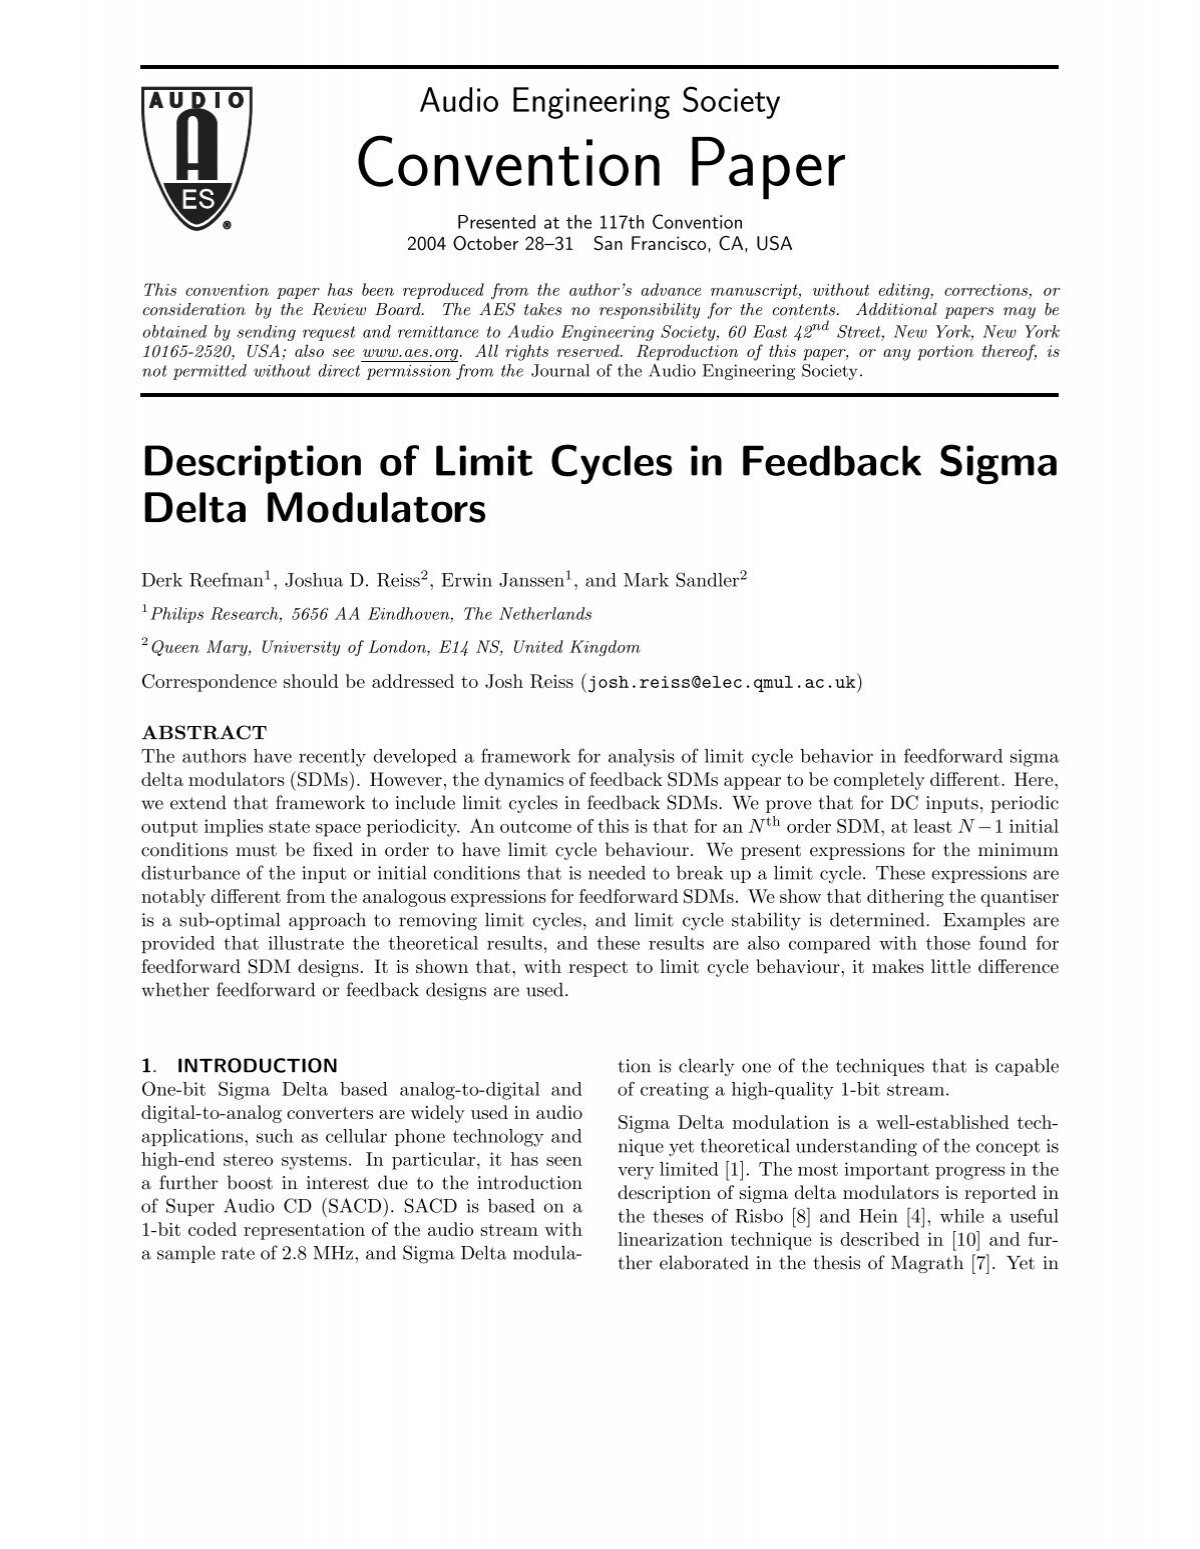 sigma cycles